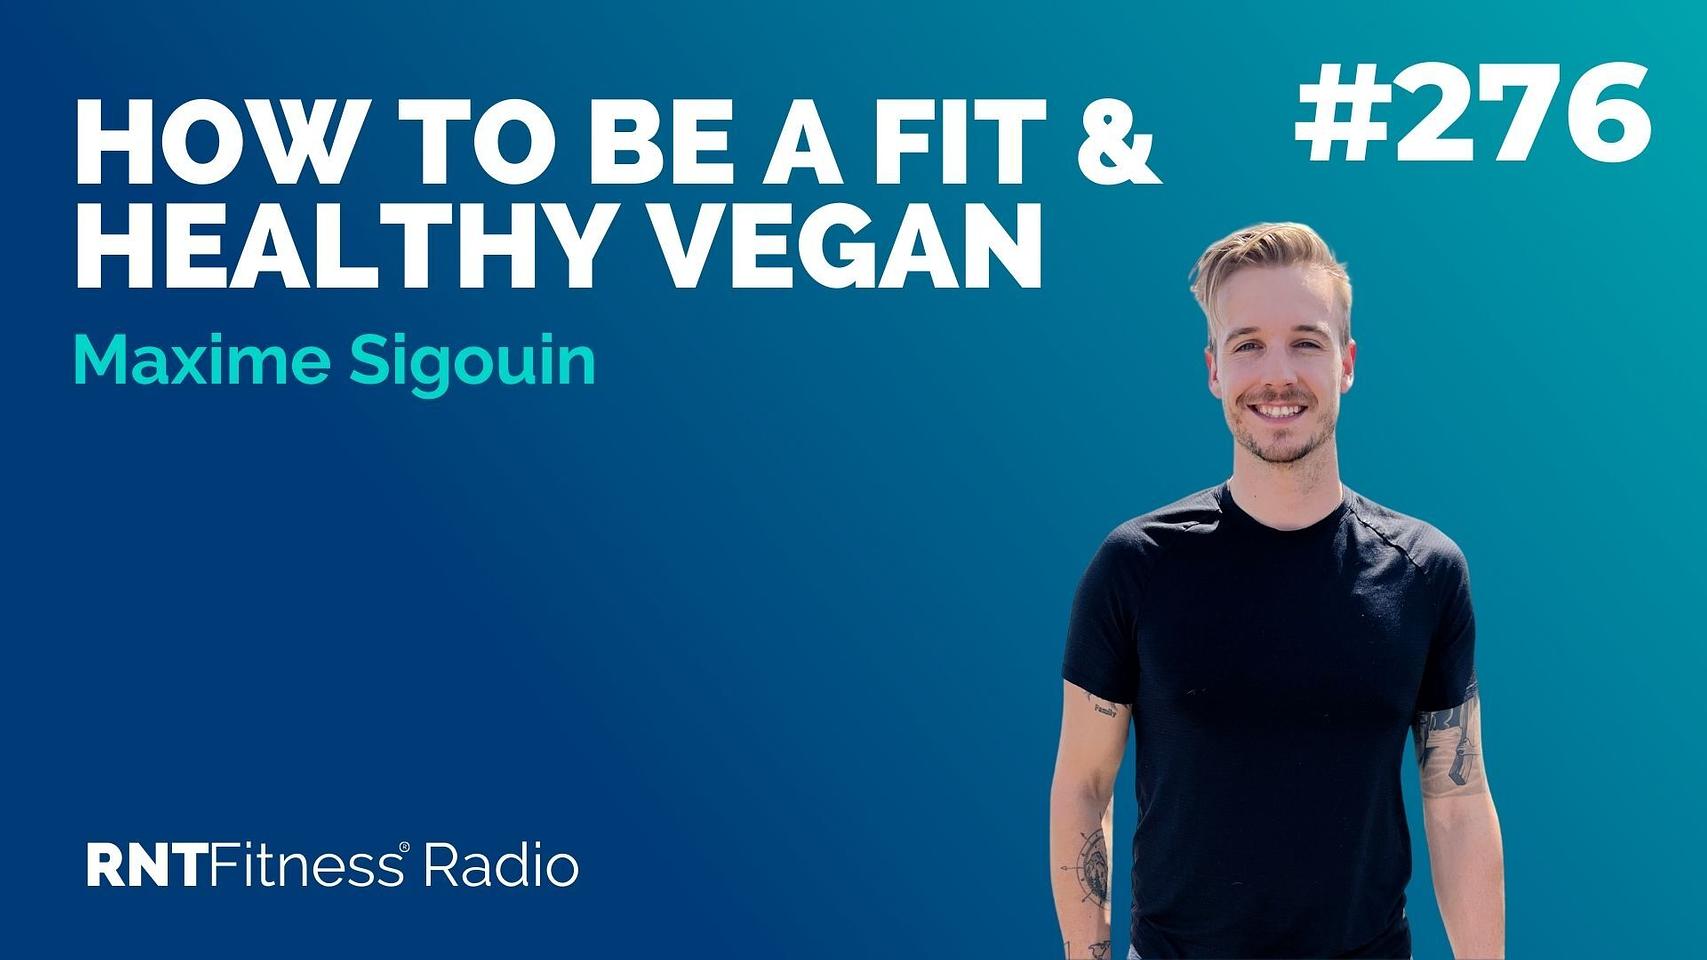 Ep 276 - How To Be A Fit & Healthy Vegan w/ Maxime Sigouin